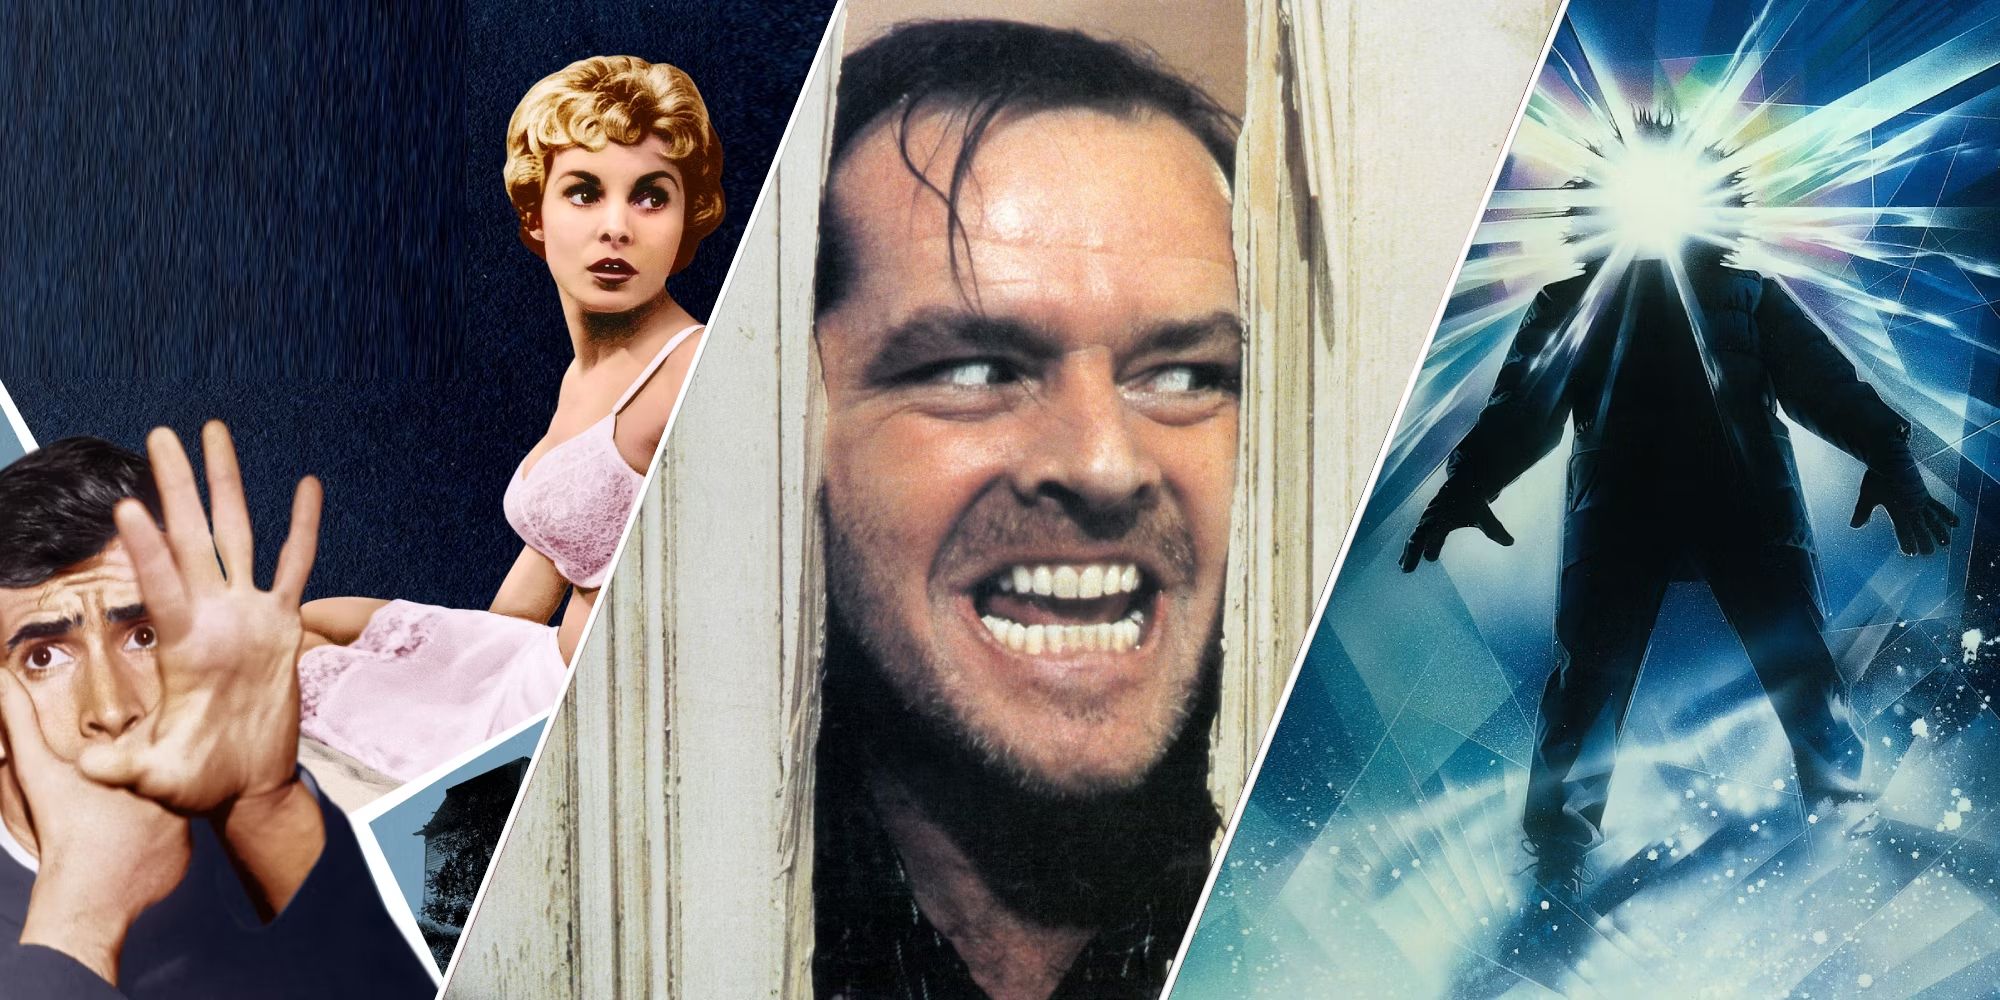 15 Best Horror Movies of All Time, According to Letterboxd